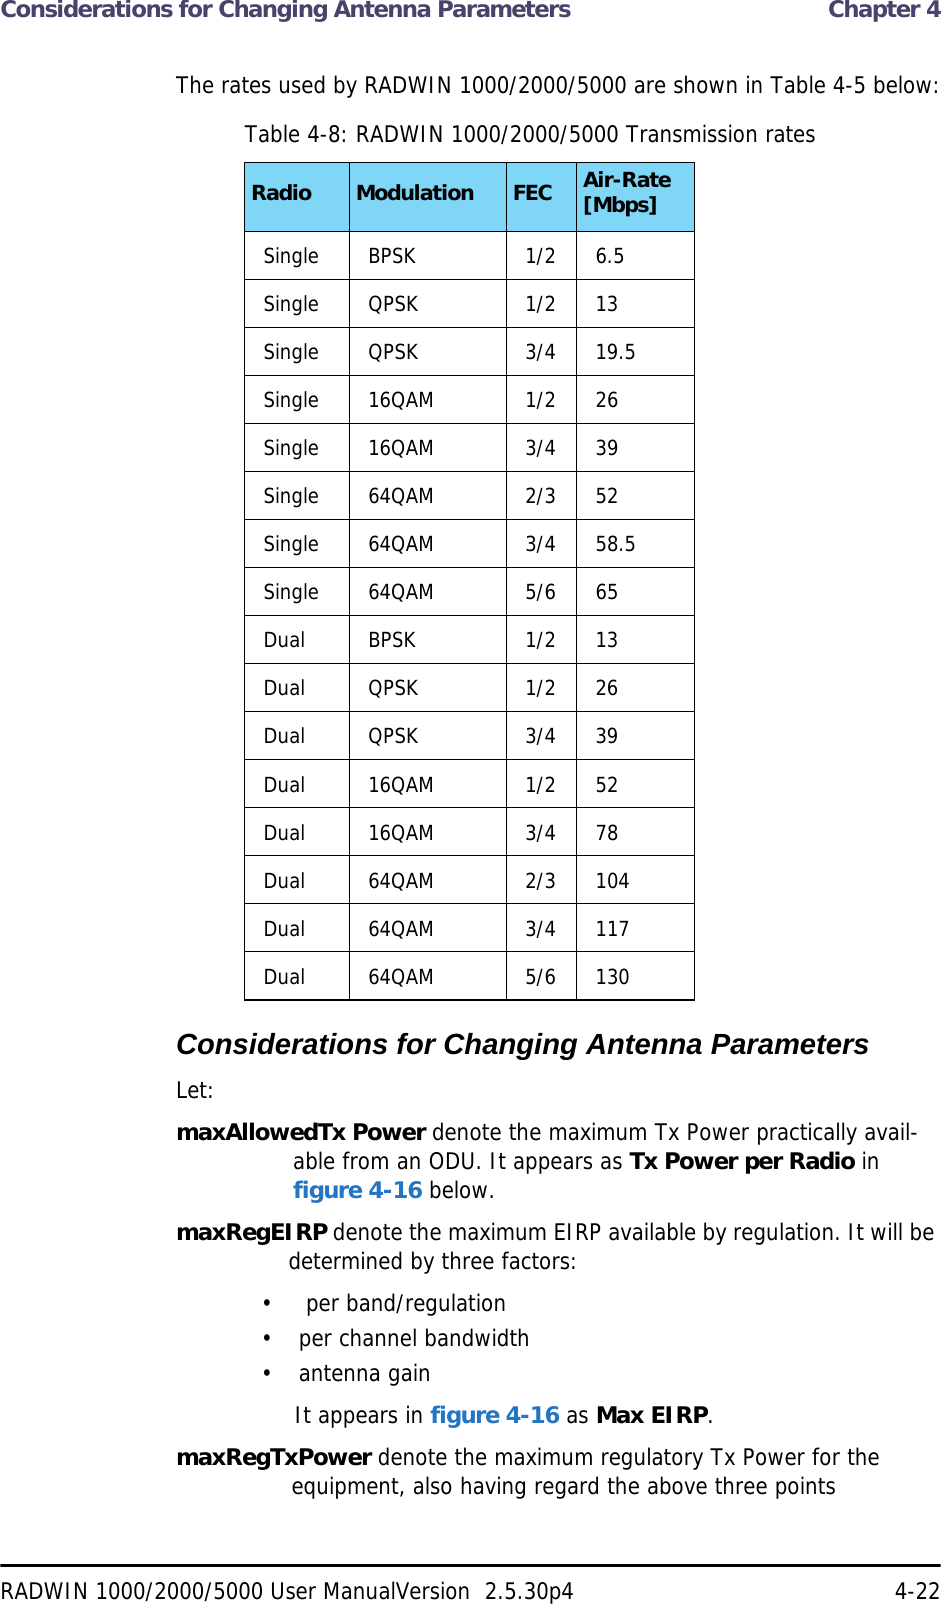 Considerations for Changing Antenna Parameters  Chapter 4RADWIN 1000/2000/5000 User ManualVersion  2.5.30p4 4-22The rates used by RADWIN 1000/2000/5000 are shown in Table 4-5 below:Considerations for Changing Antenna ParametersLet:maxAllowedTx Power denote the maximum Tx Power practically avail-able from an ODU. It appears as Tx Power per Radio in figure 4-16 below.maxRegEIRP denote the maximum EIRP available by regulation. It will be determined by three factors:•  per band/regulation• per channel bandwidth• antenna gainIt appears in figure 4-16 as Max EIRP.maxRegTxPower denote the maximum regulatory Tx Power for the equipment, also having regard the above three pointsTable 4-8: RADWIN 1000/2000/5000 Transmission ratesRadio Modulation FEC Air-Rate [Mbps]Single BPSK 1/2 6.5Single QPSK 1/2 13Single QPSK 3/4 19.5Single 16QAM 1/2 26Single 16QAM 3/4 39Single 64QAM 2/3 52Single 64QAM 3/4 58.5Single 64QAM 5/6 65Dual BPSK 1/2 13Dual QPSK 1/2 26Dual QPSK 3/4 39Dual 16QAM 1/2 52Dual 16QAM 3/4 78Dual 64QAM 2/3 104Dual 64QAM 3/4 117Dual 64QAM 5/6 130